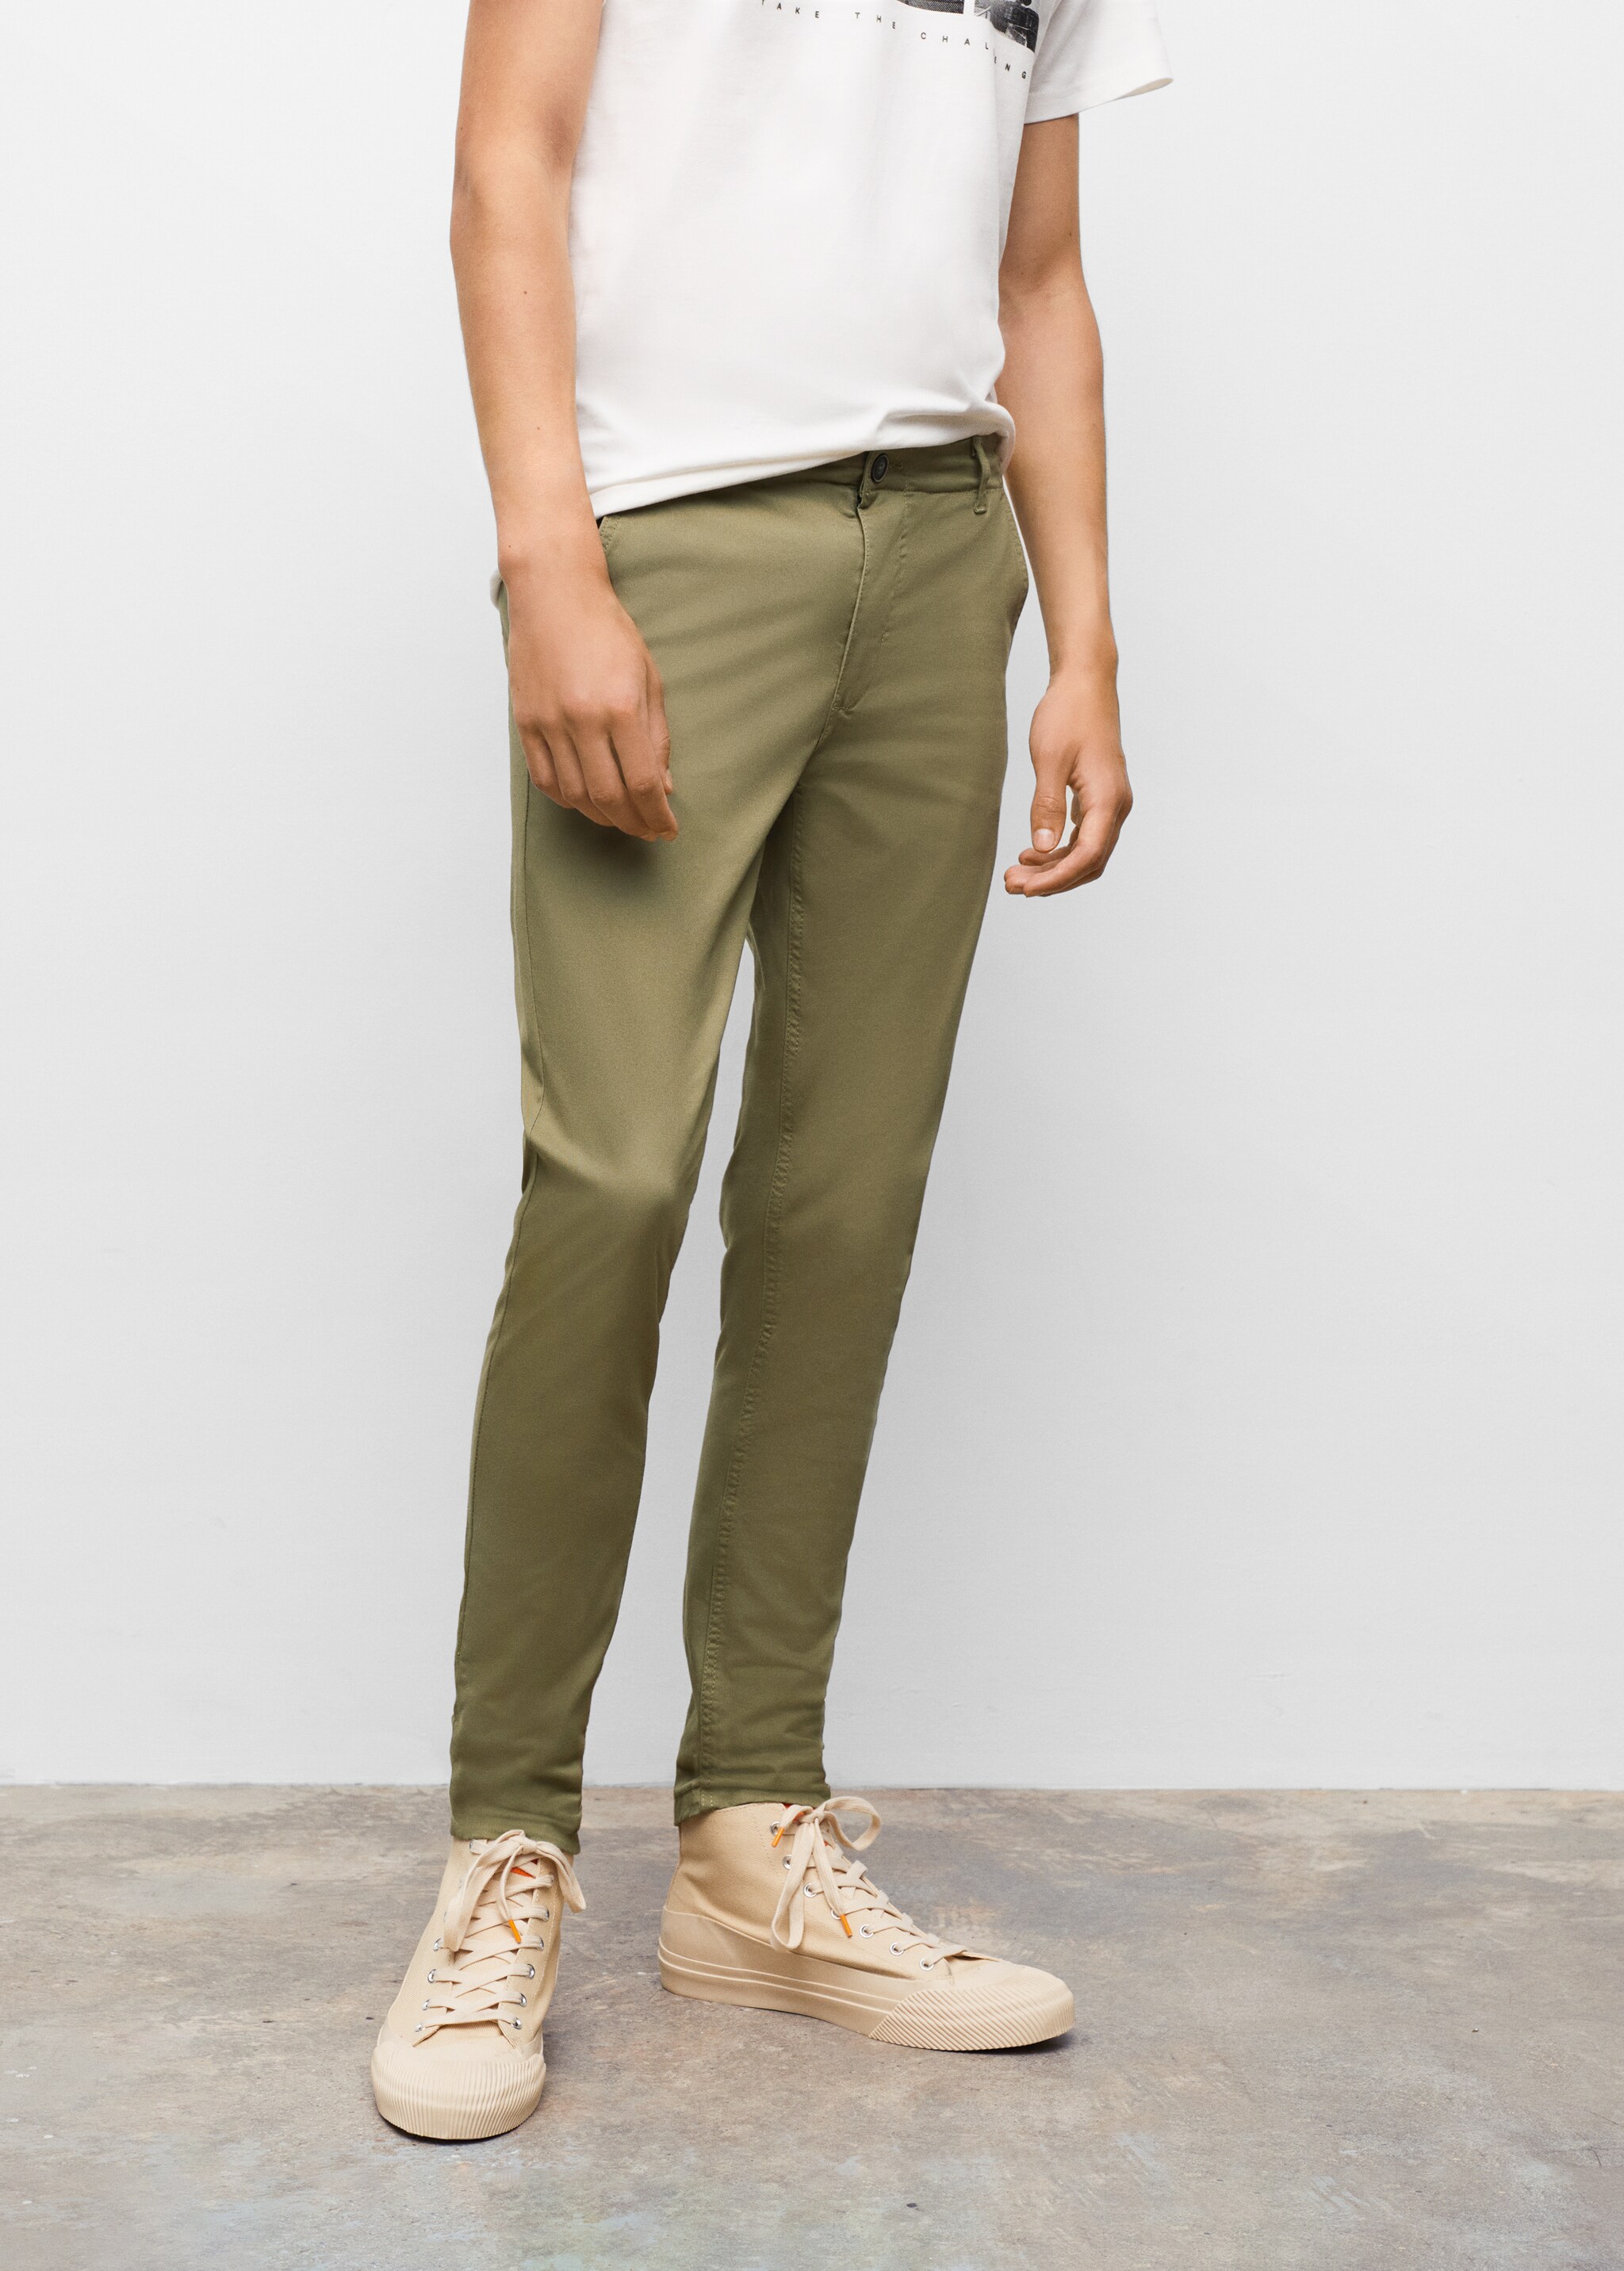 Cotton chinos - Details of the article 1